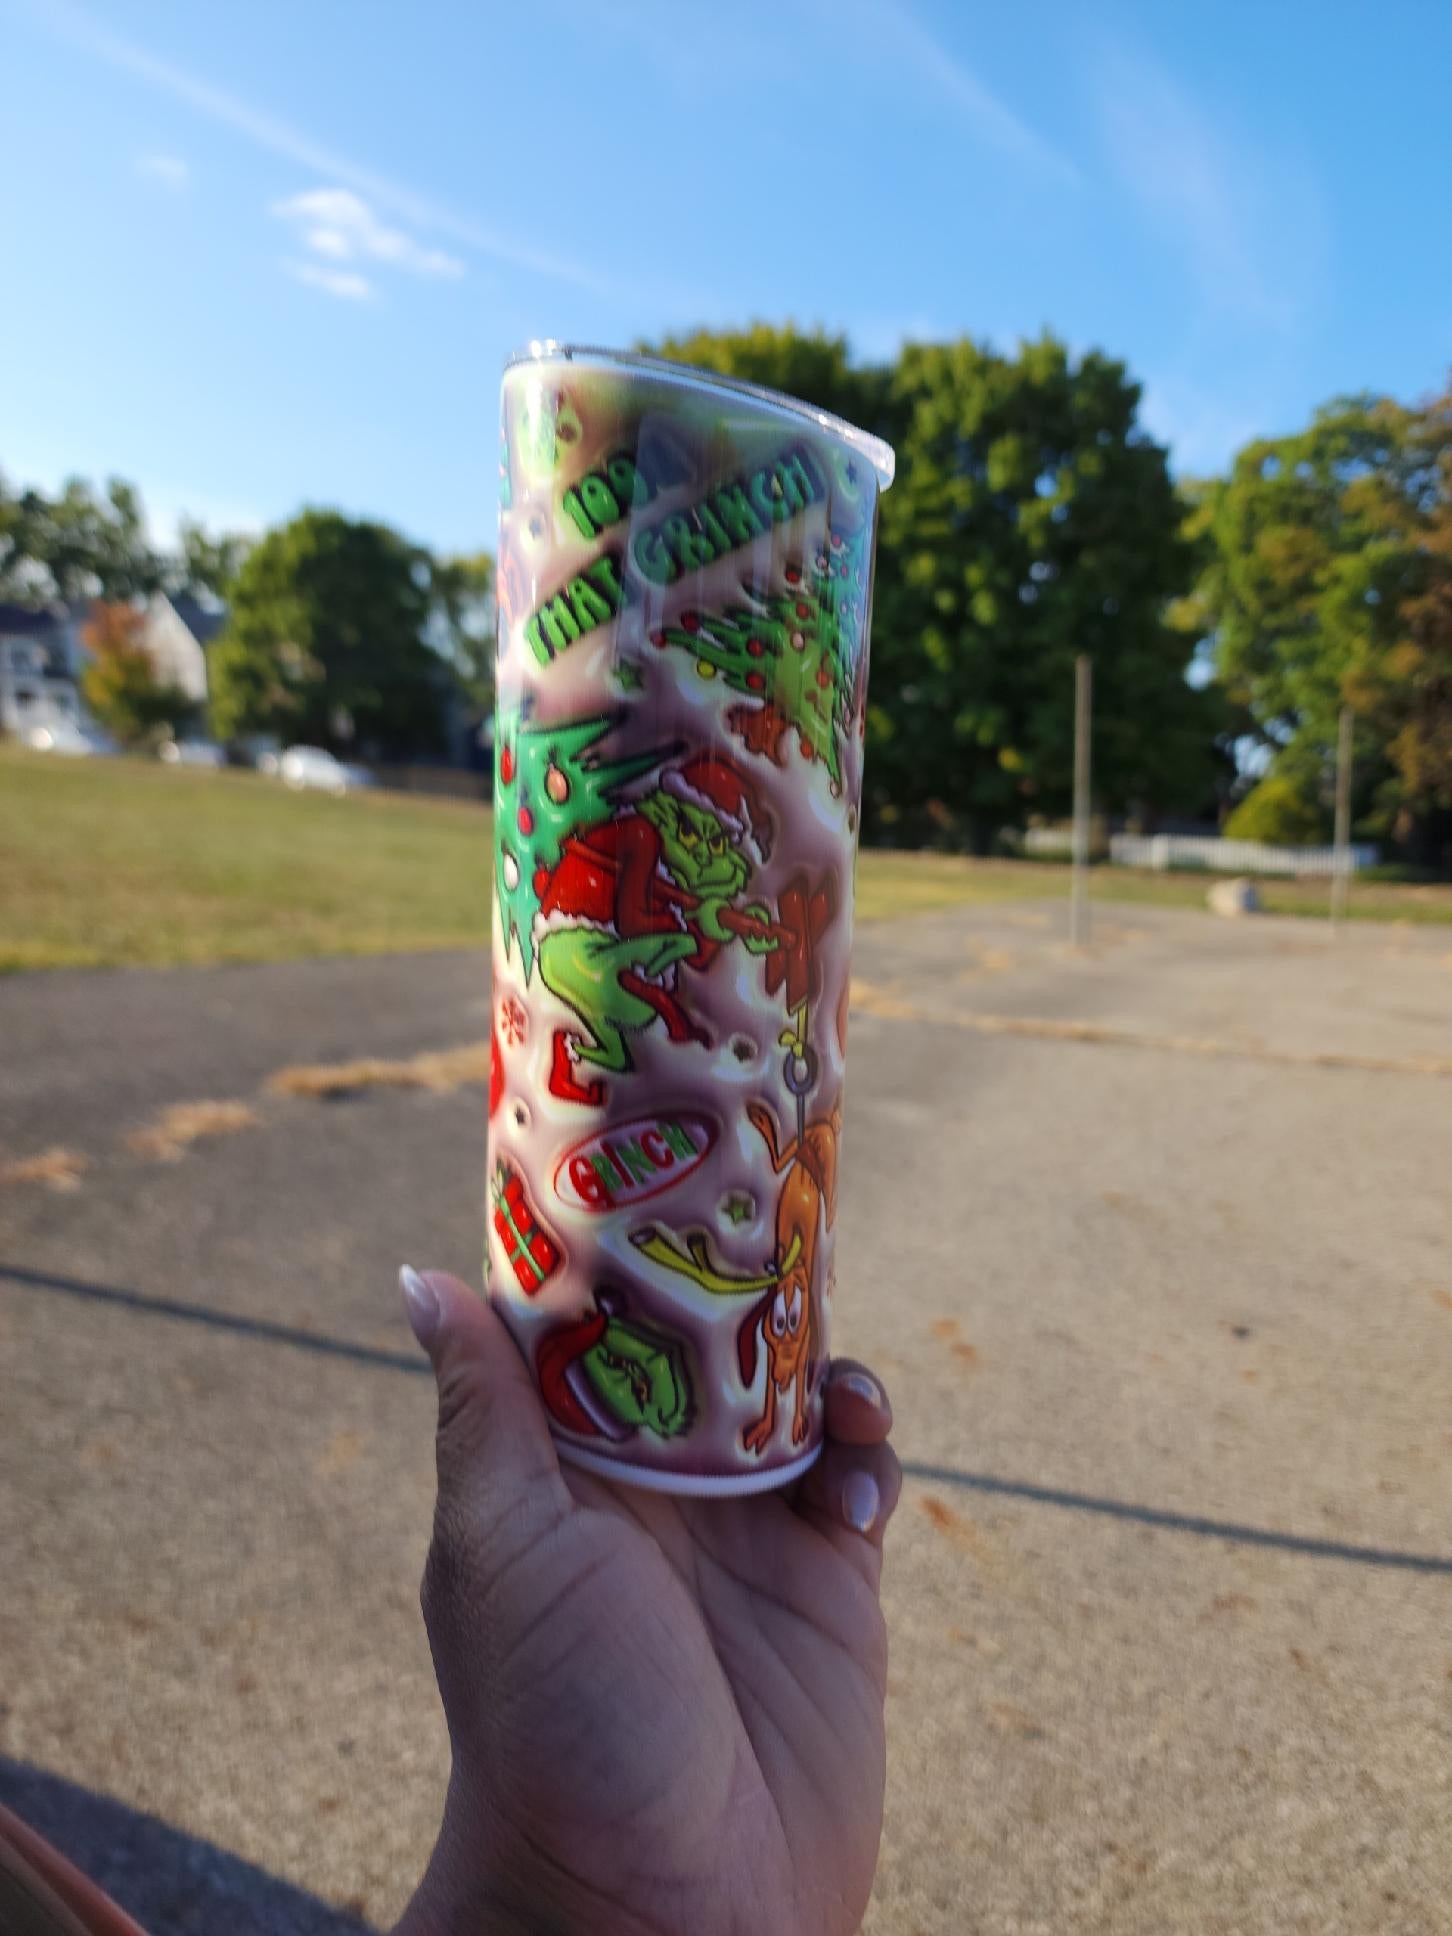 Grinch Tumbler - 2 – Mindless Creations